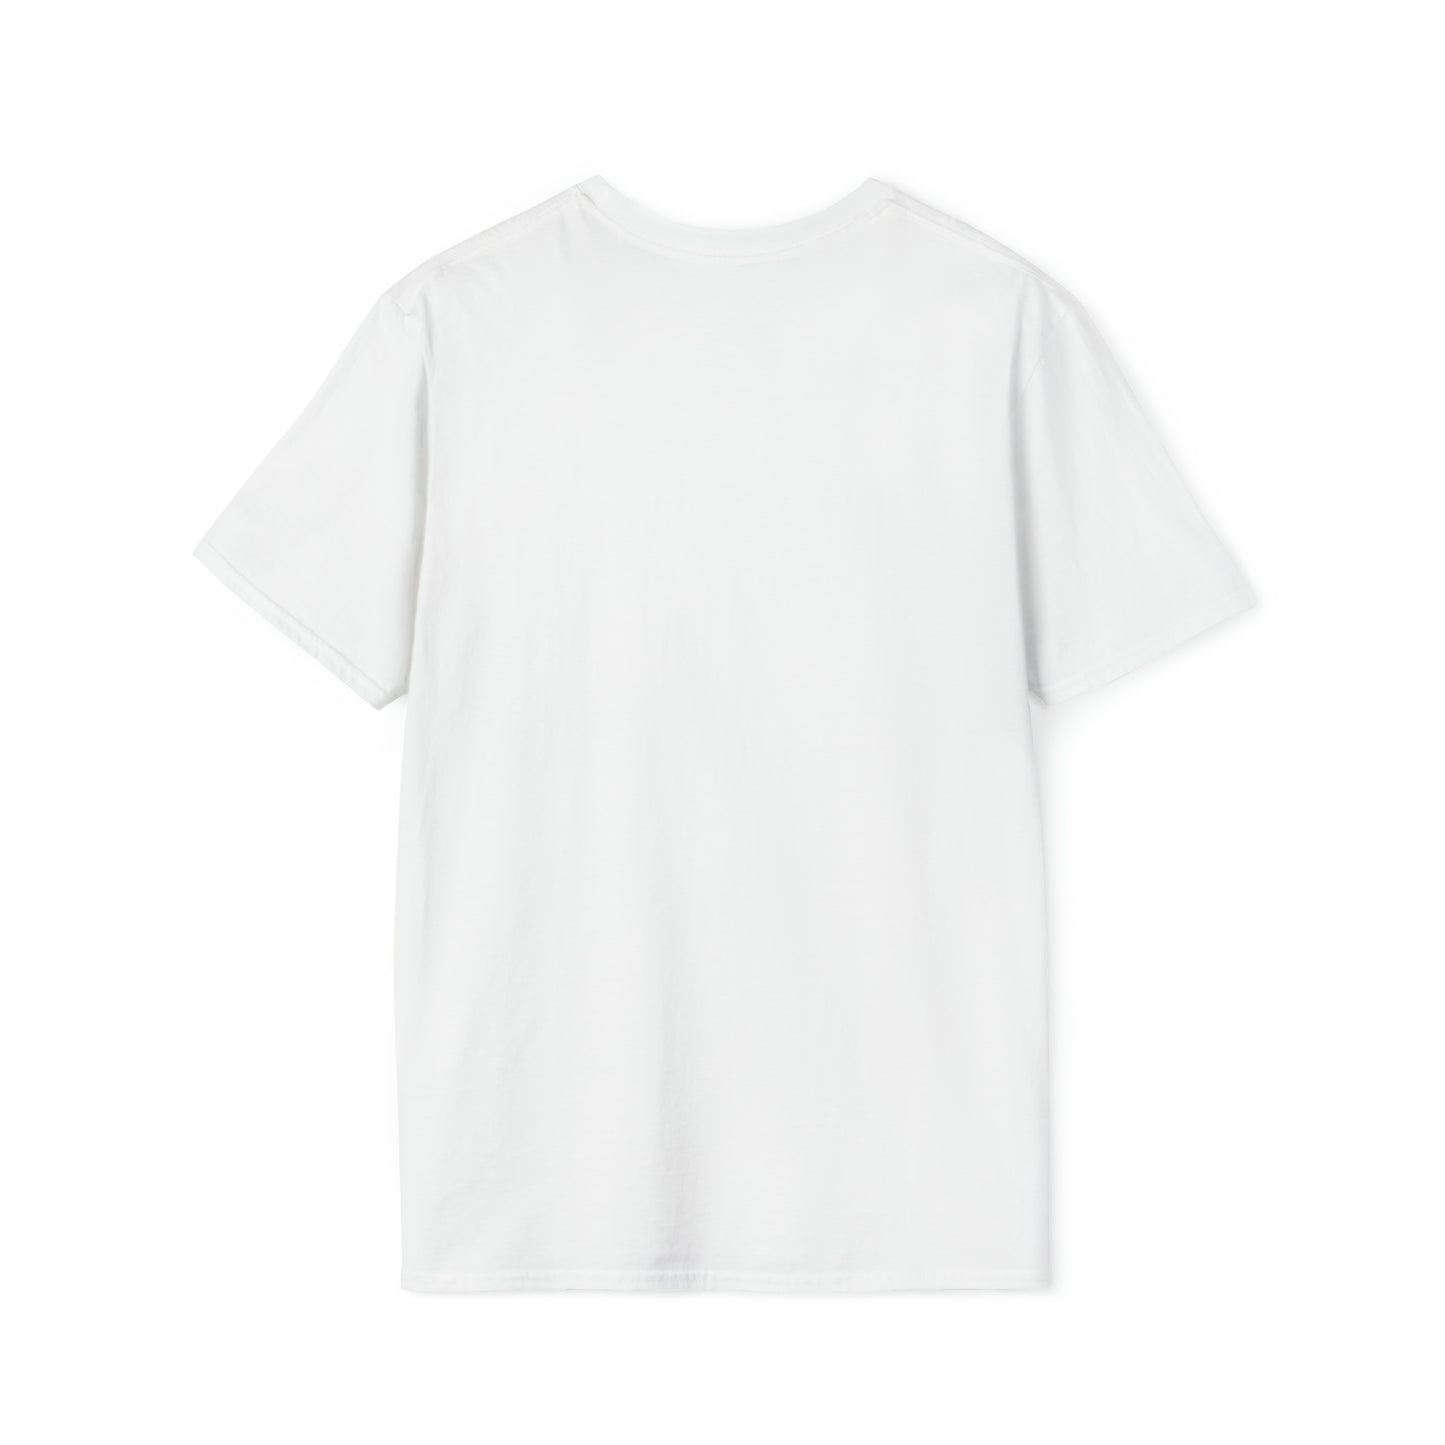 Attachment Unisex Softstyle T-Shirt